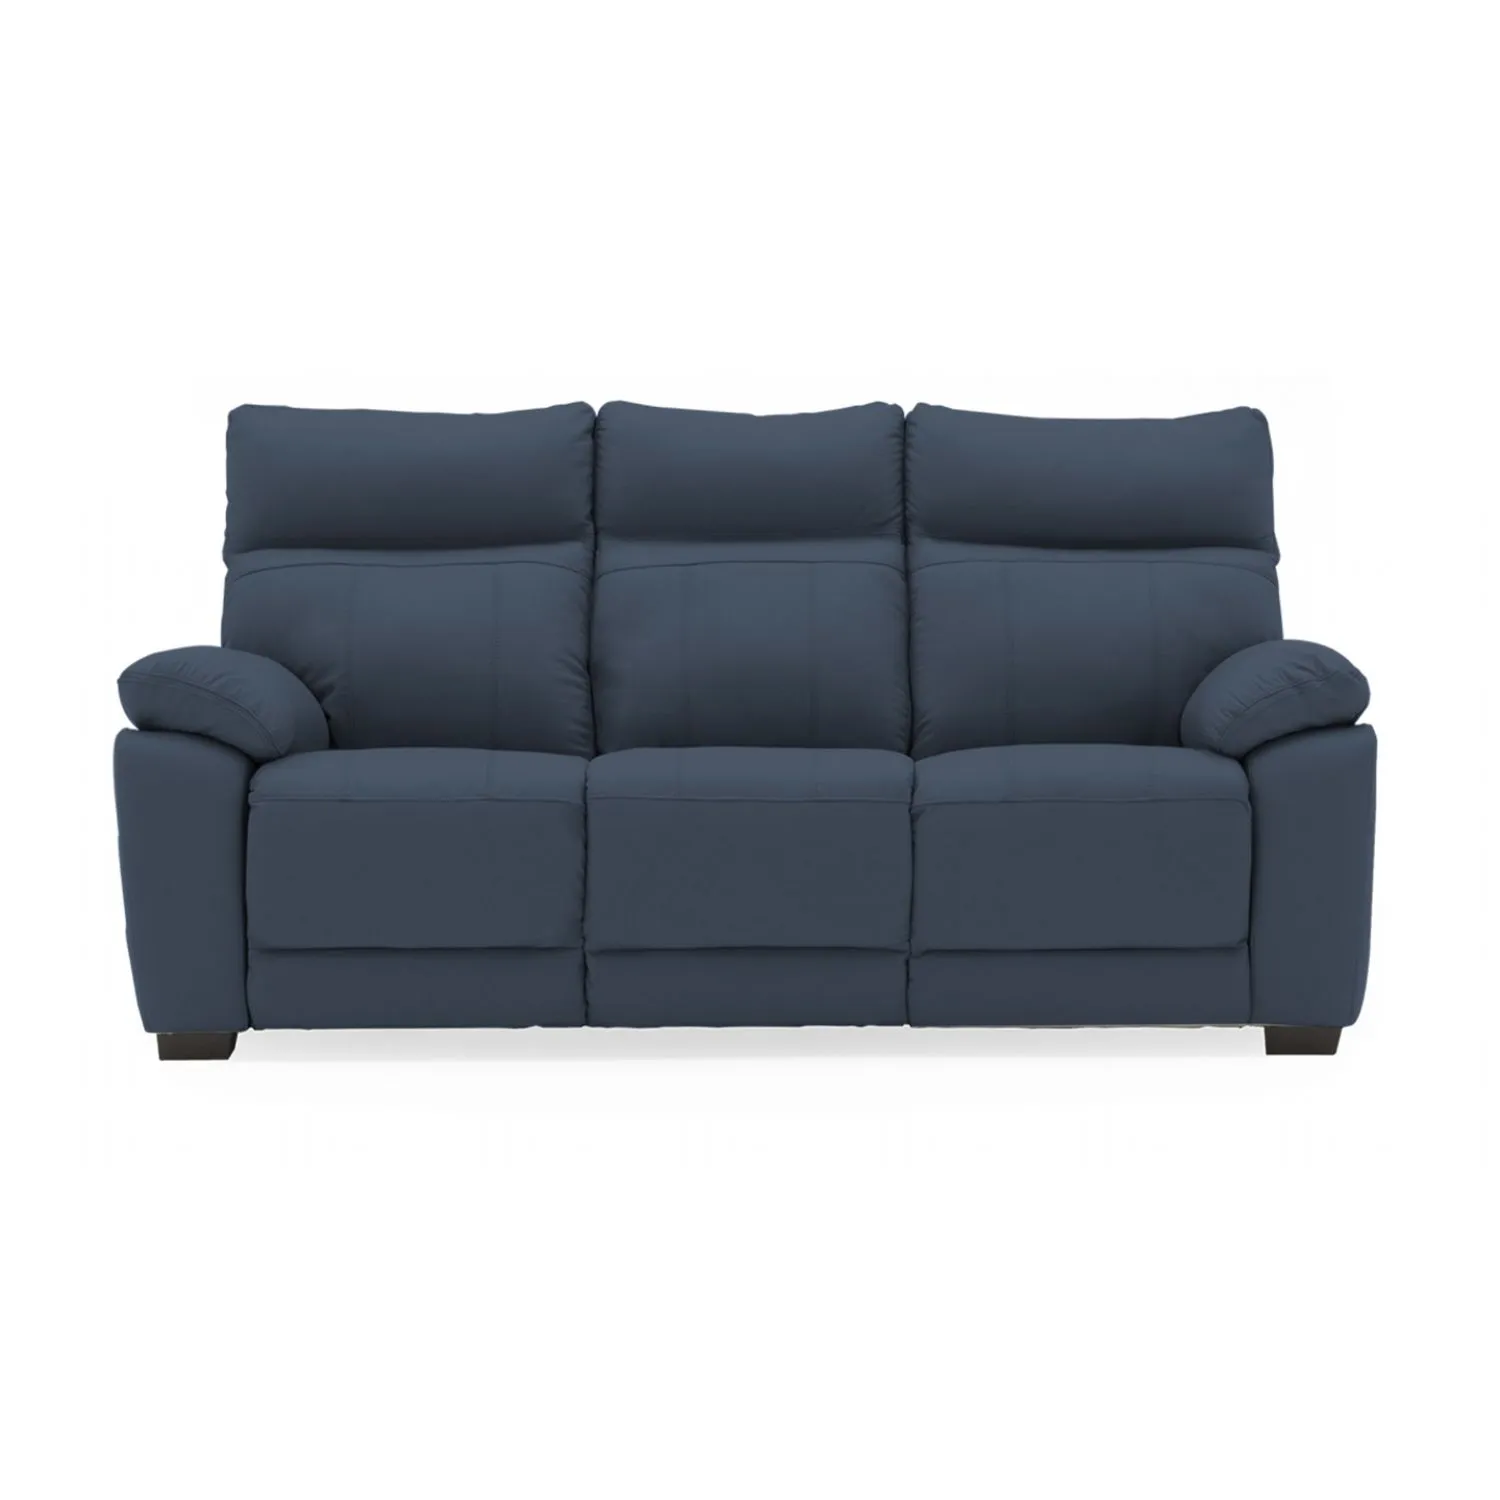 Blue Leather 3 Seater Upholstered Sofa